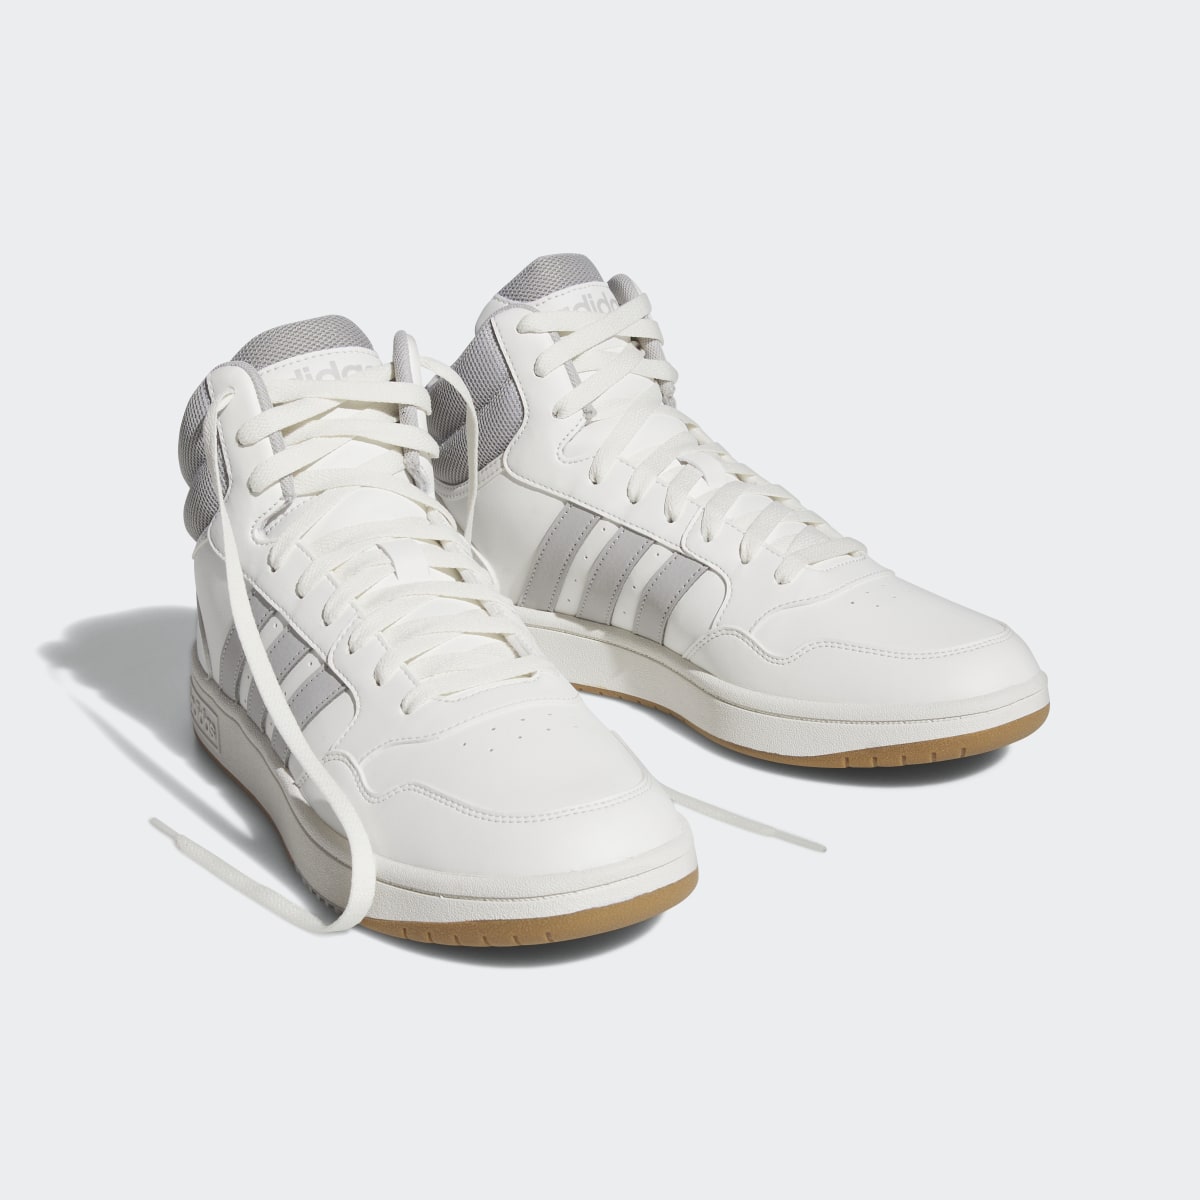 Adidas Hoops 3.0 Mid Classic Vintage Shoes. 5